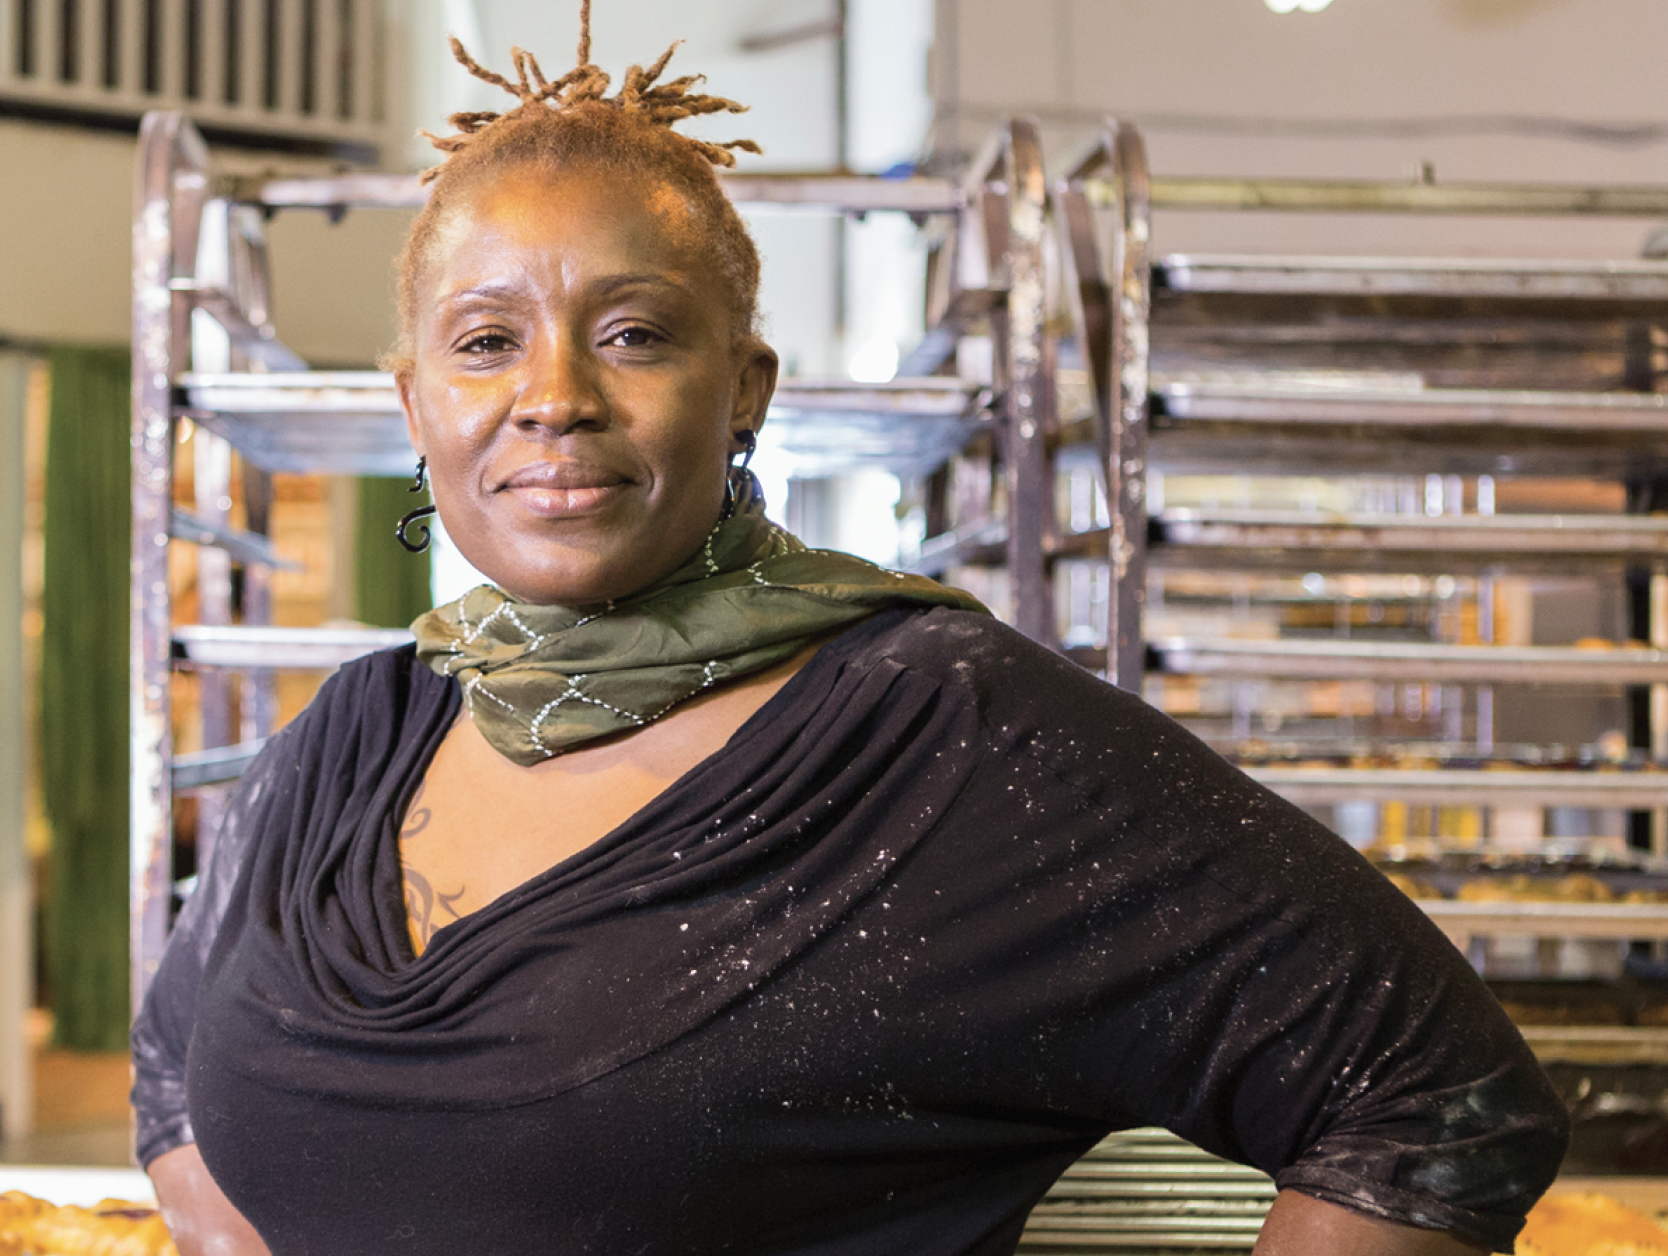 African American  woman looking into camera with a half-smile, with racks of food trays behind her.